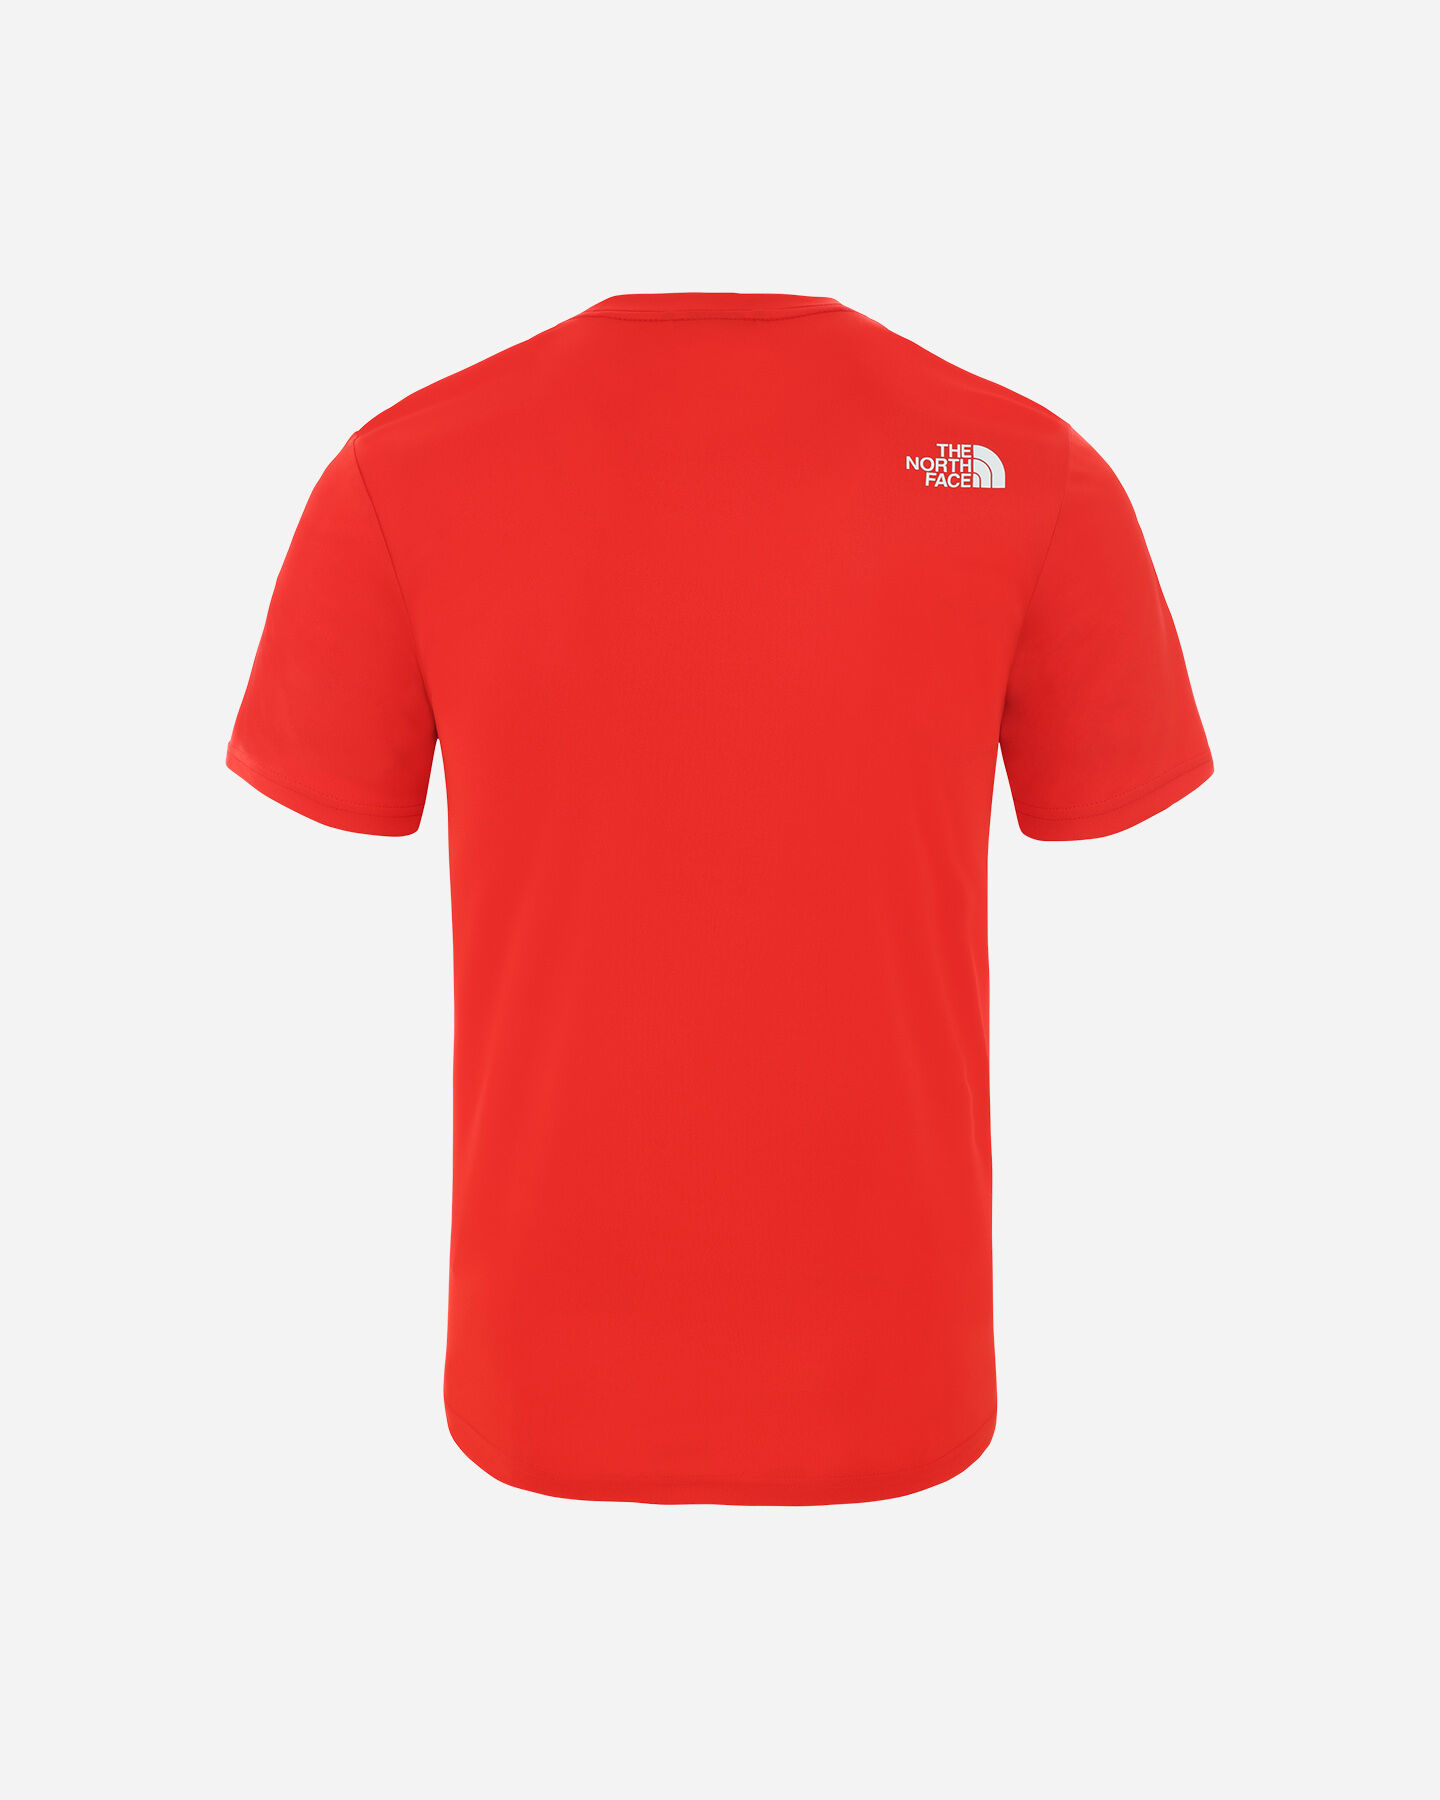  T-Shirt THE NORTH FACE REAXION M S5203353|15Q|S scatto 1